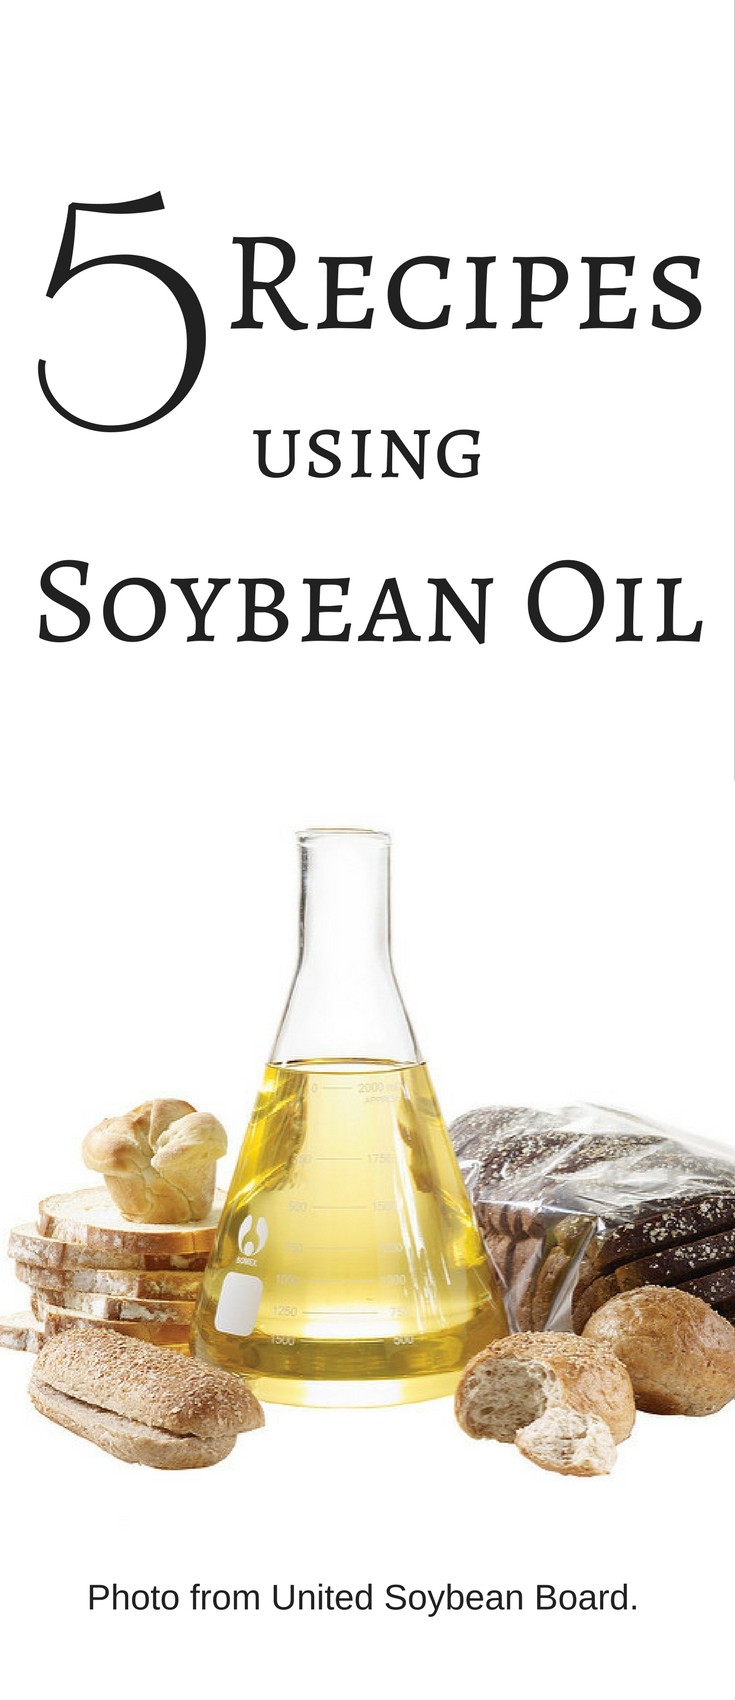 Recipes for Soybean Oil